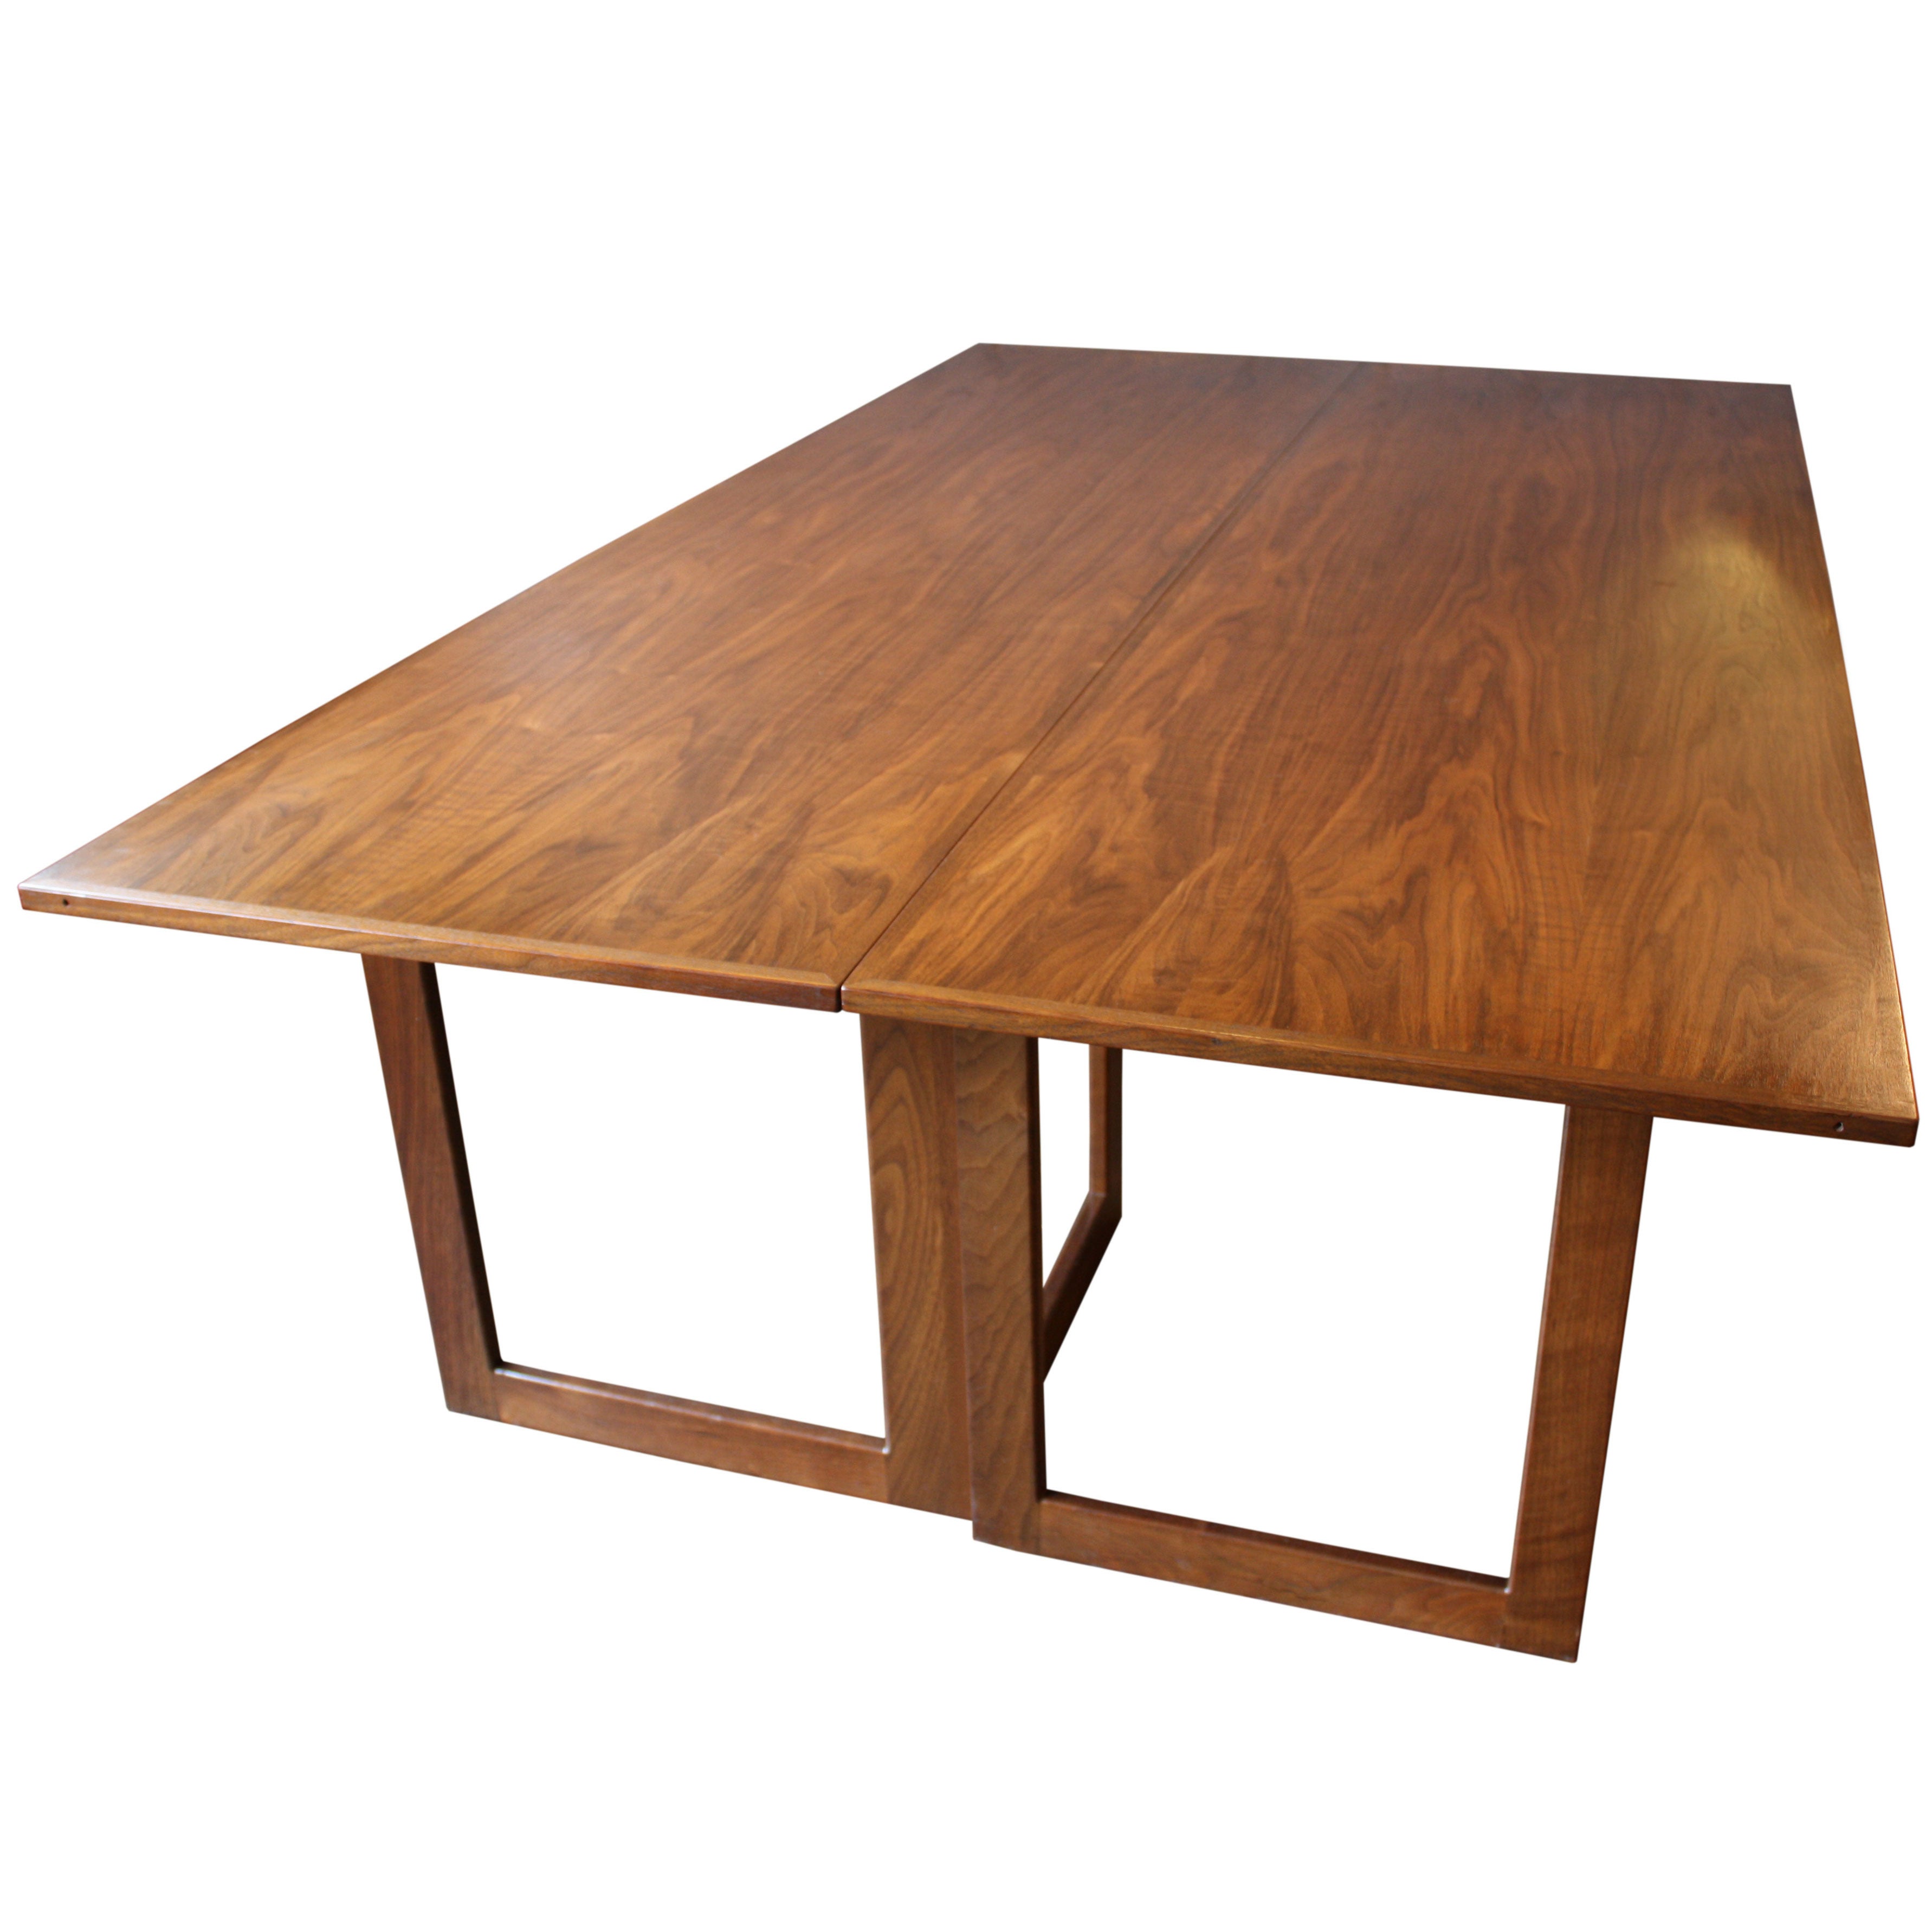 American Modern Walnut Console or Convertible Dining Table with Gate Legs